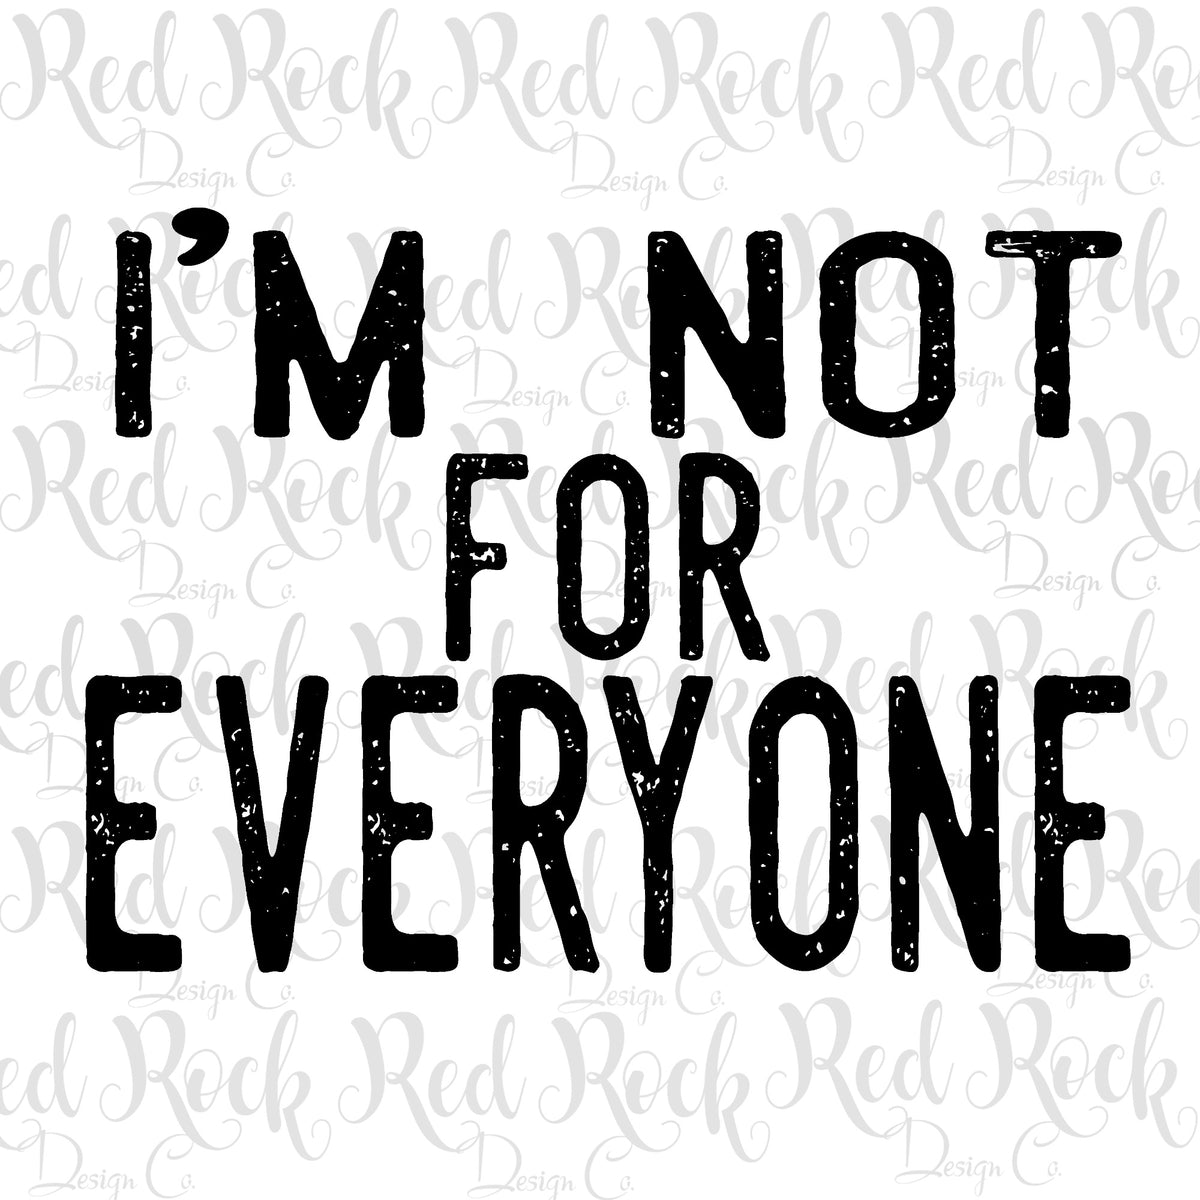 Im Not For Everyone Dd – Red Rock Design Co